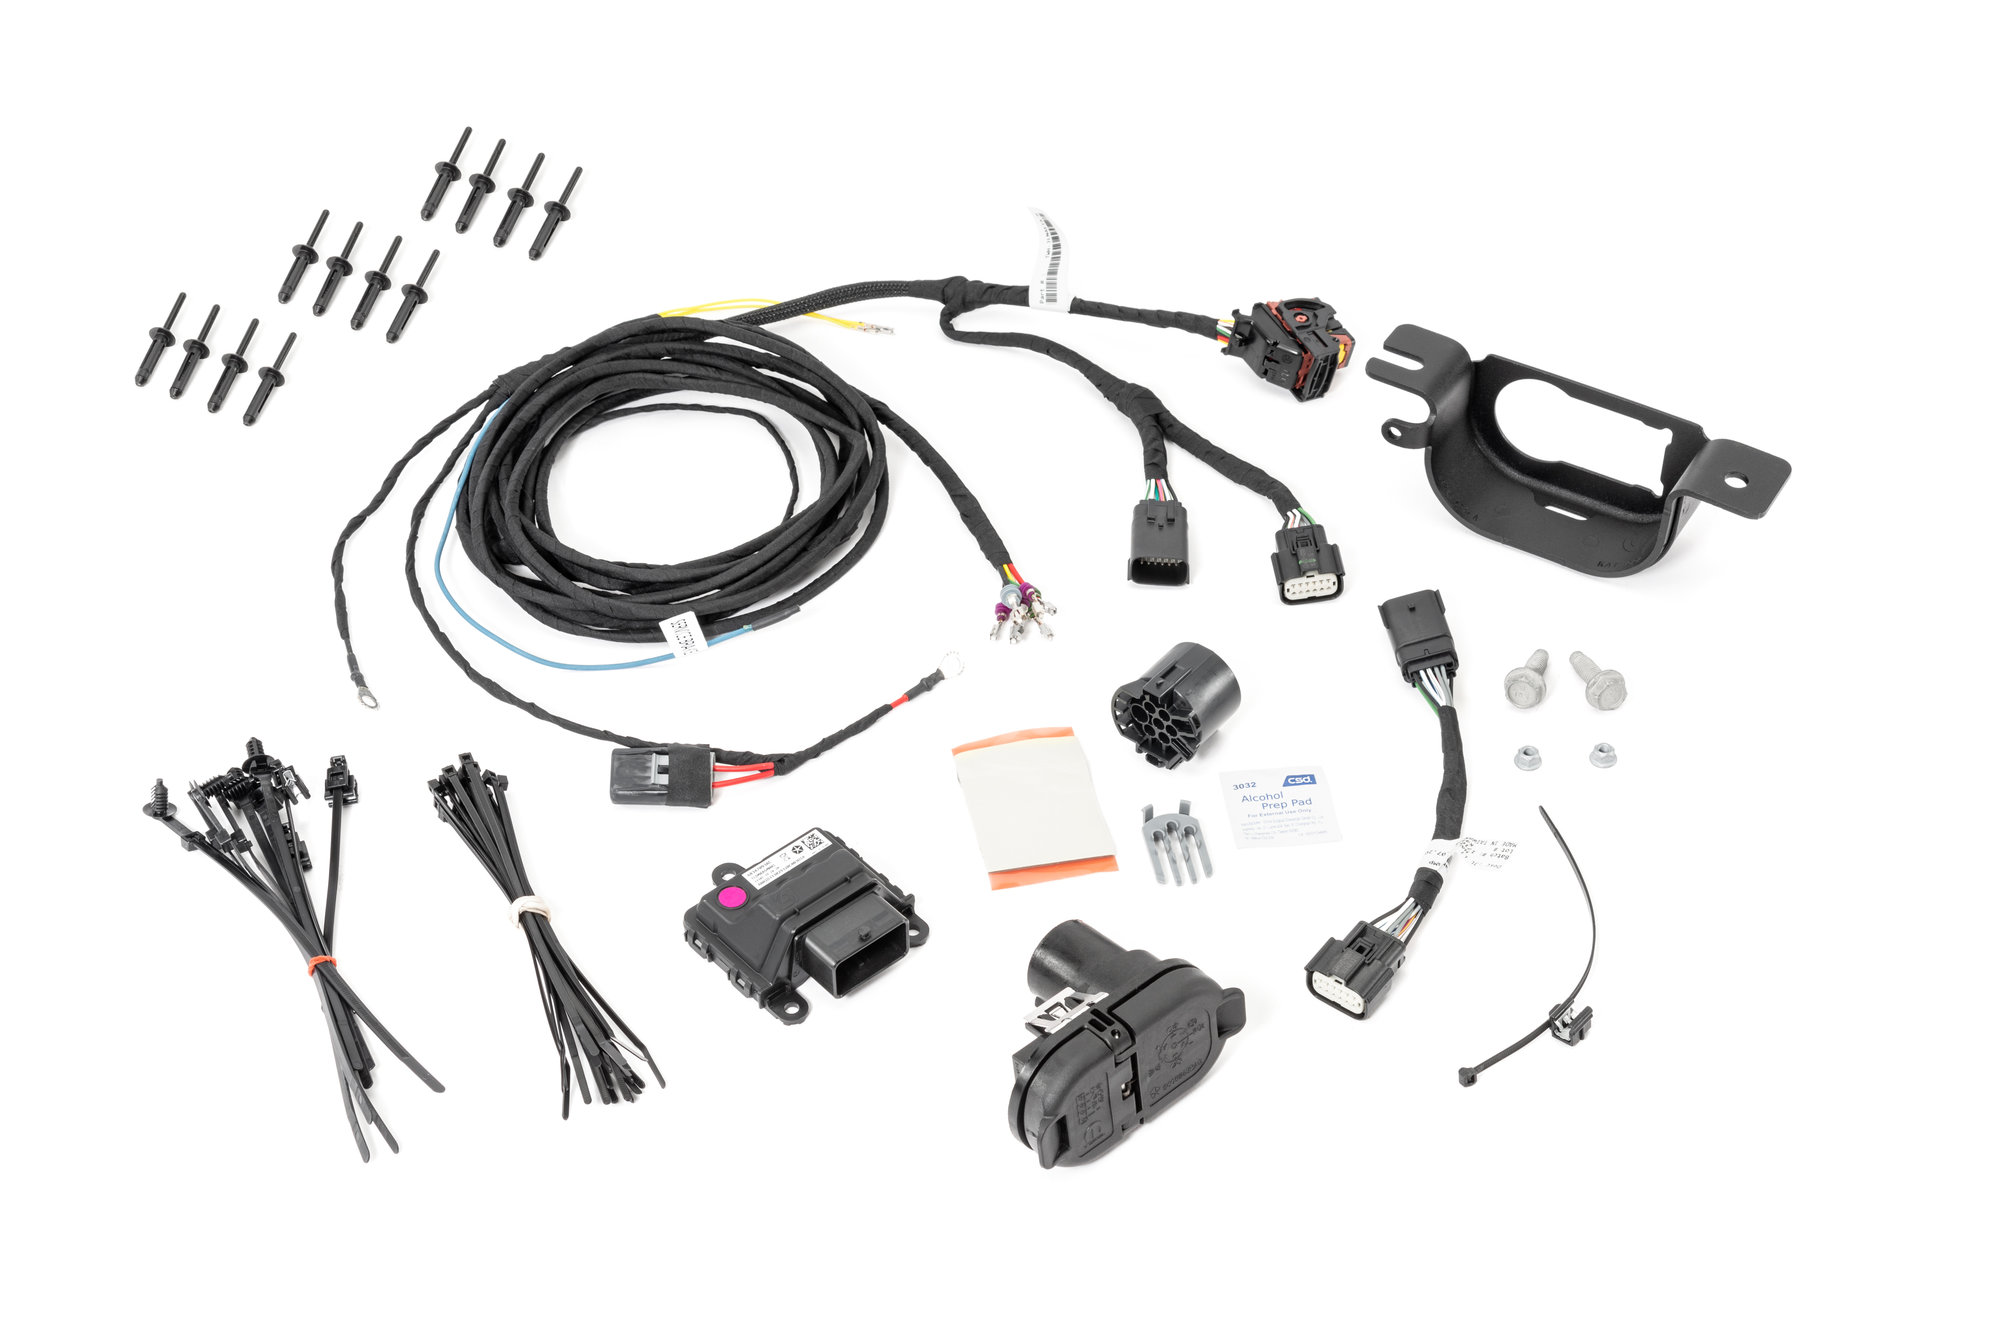 EAG 67 Trailer Hitch Wiring Harness Kit Single Fit for 07-18 Jeep Wrangler JK 